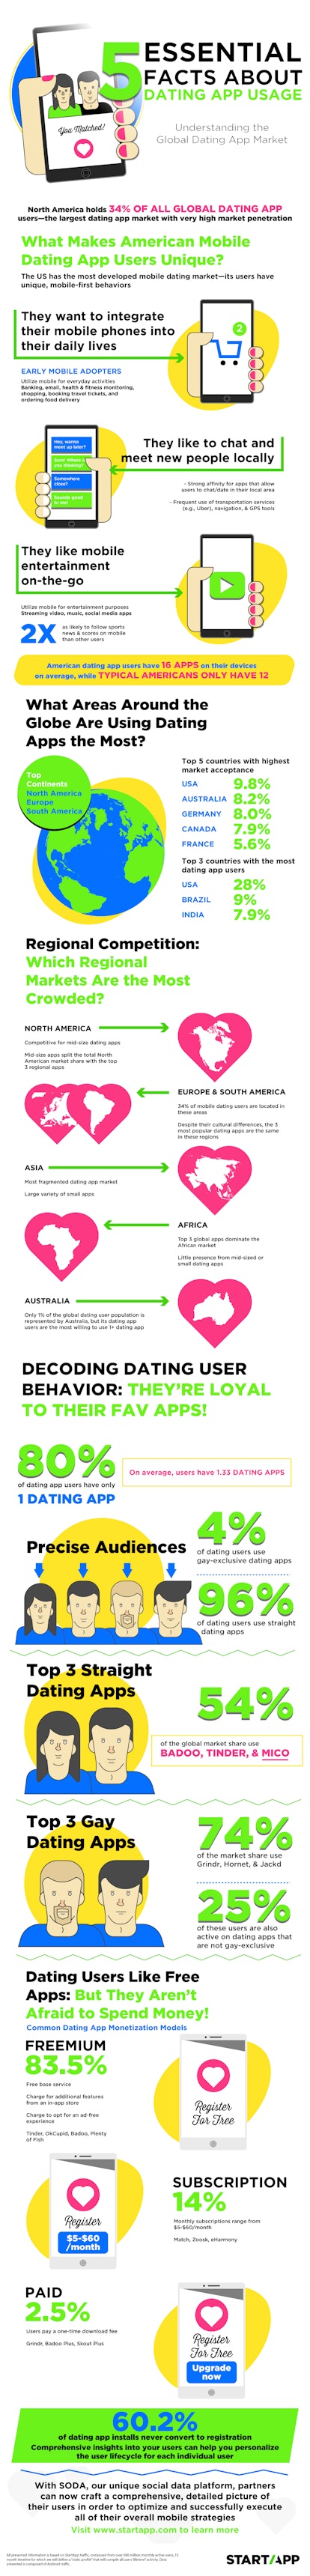 Three New Dating Apps You Should Know About